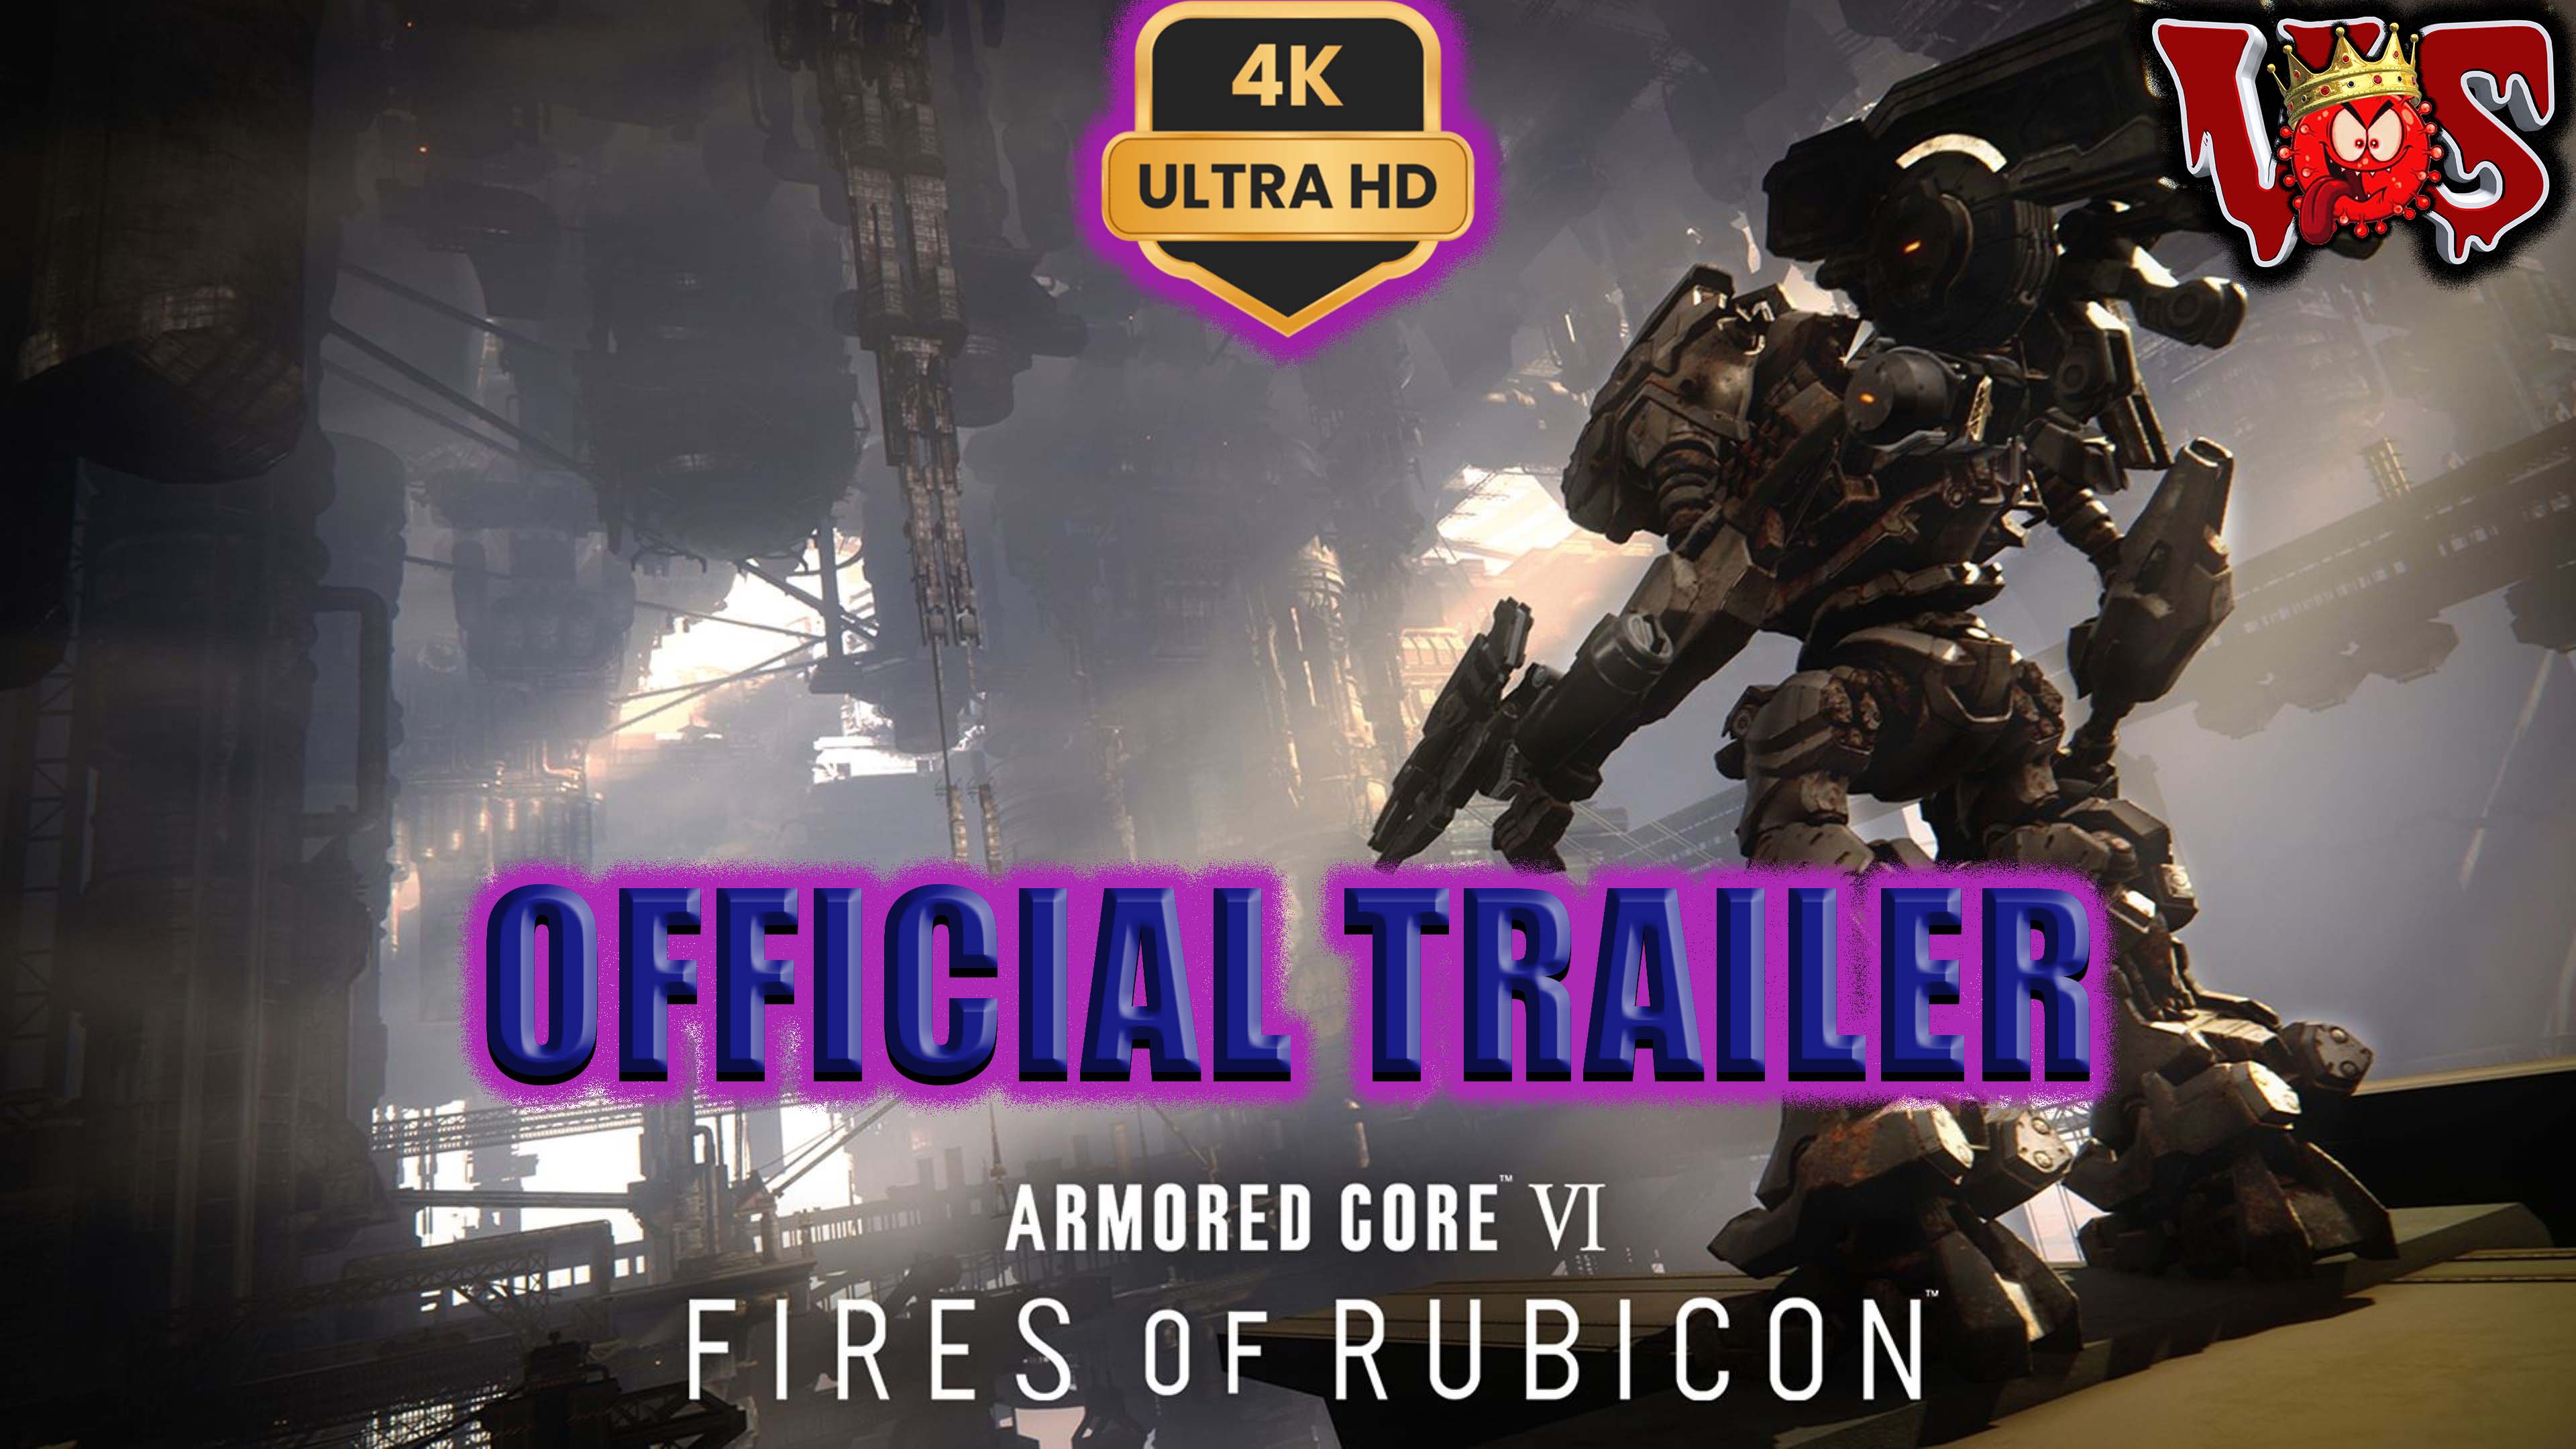 Armored Core 6 - Fires Of Rubicon ➤ Официальный трейлер 💥 4K-UHD 💥